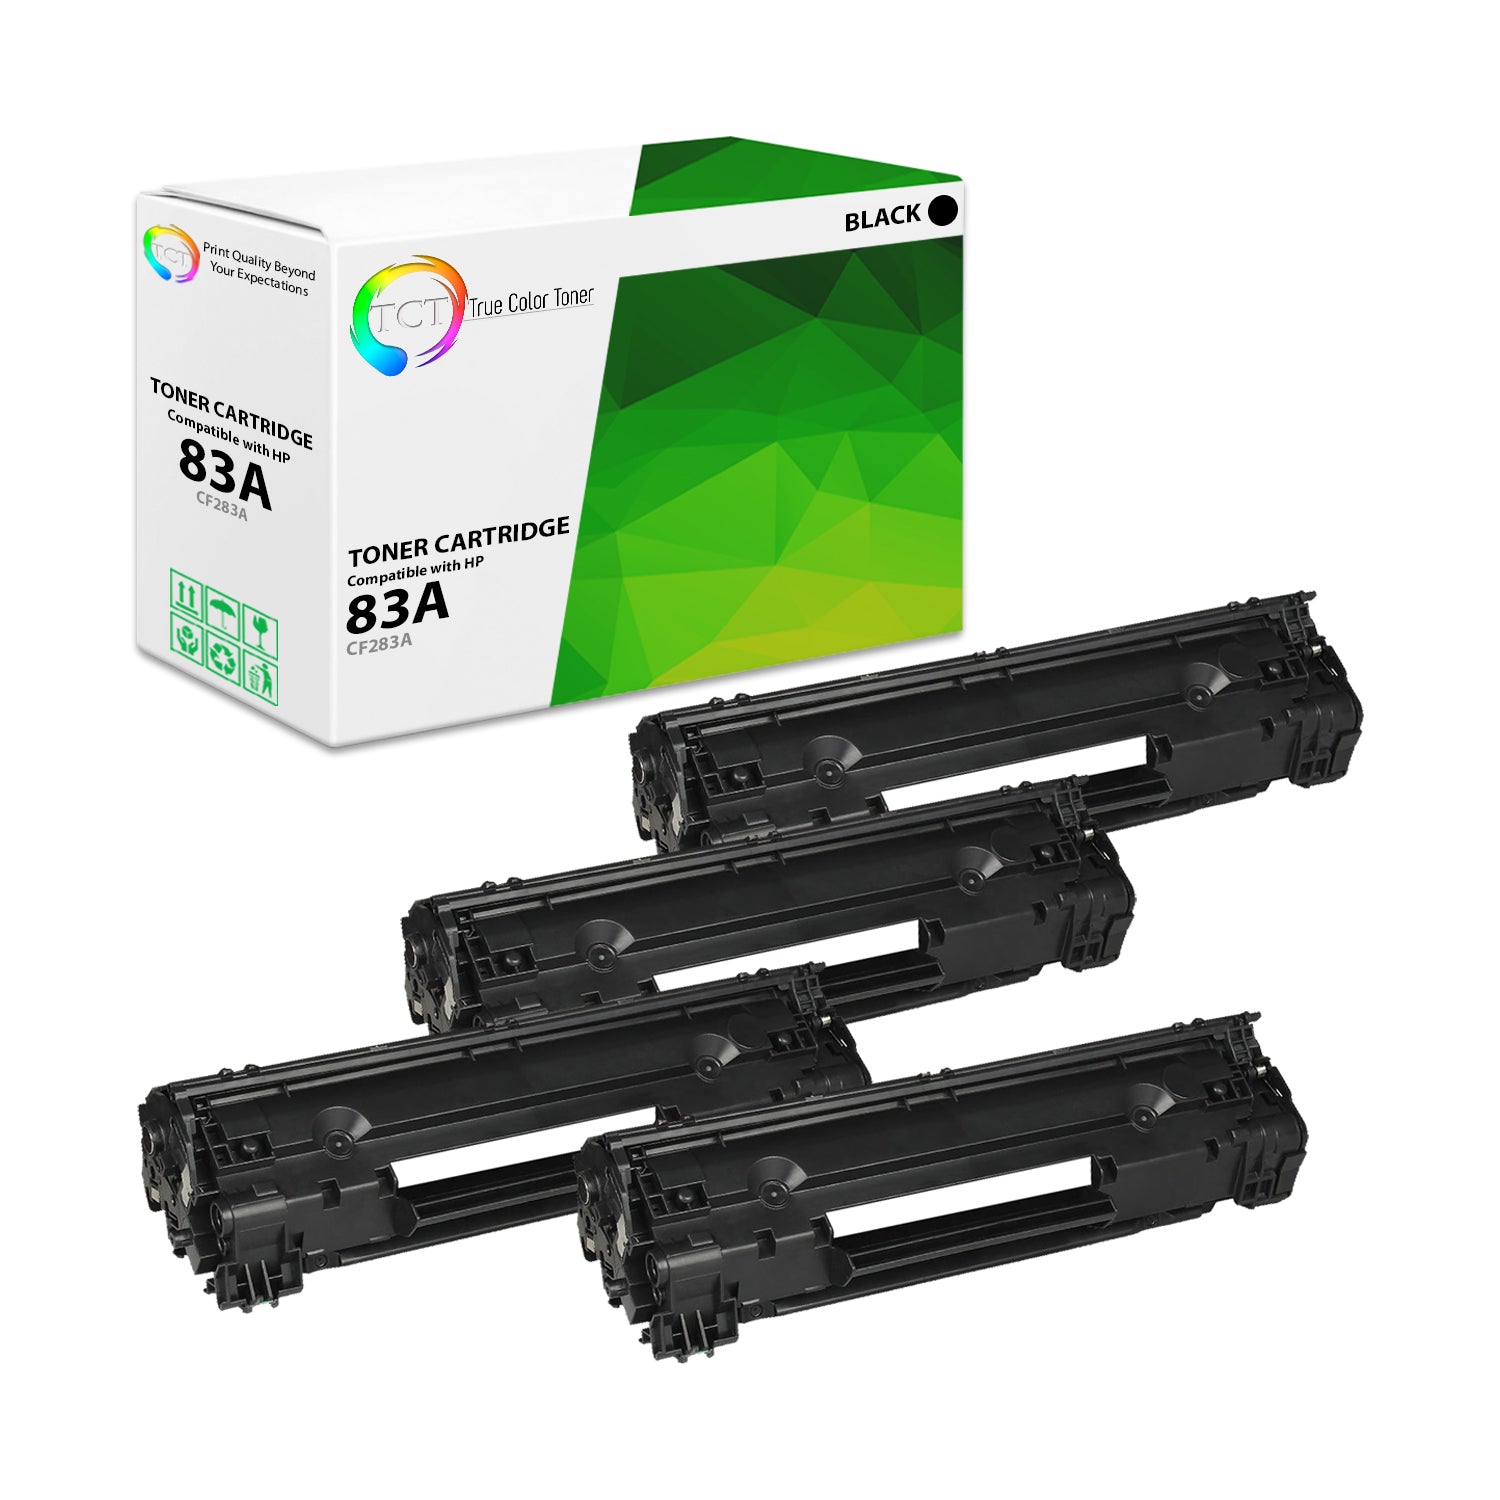 TCT Compatible Toner Cartridge Replacement for the HP 83A Series - 4 Pack Black